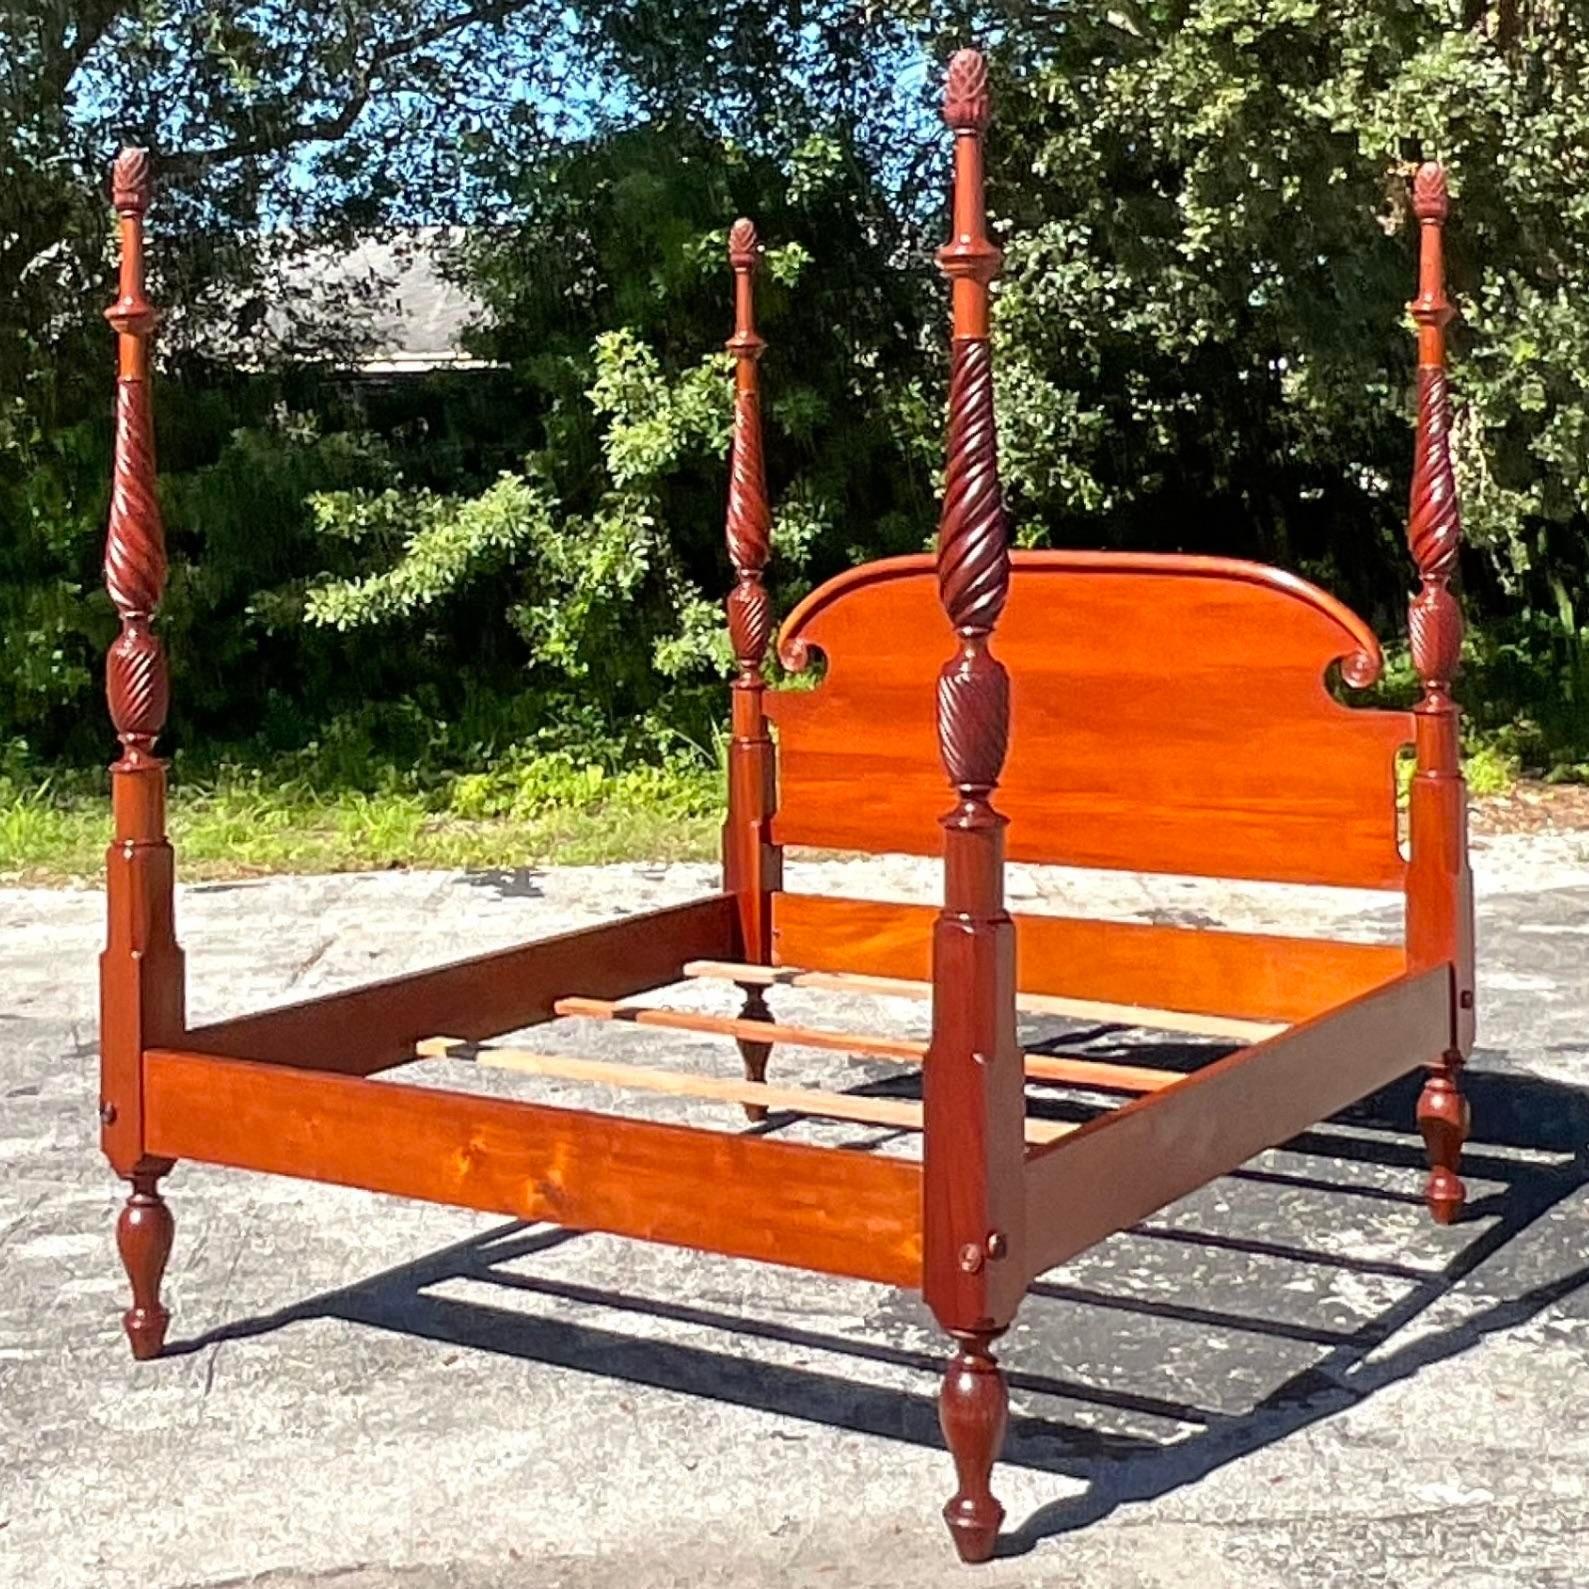 A fantastic vintage Boho King bed. A chic hand carved rice design with beautiful wood grain detail. Interior slat supports. Acquired from a Palm Beach estate.